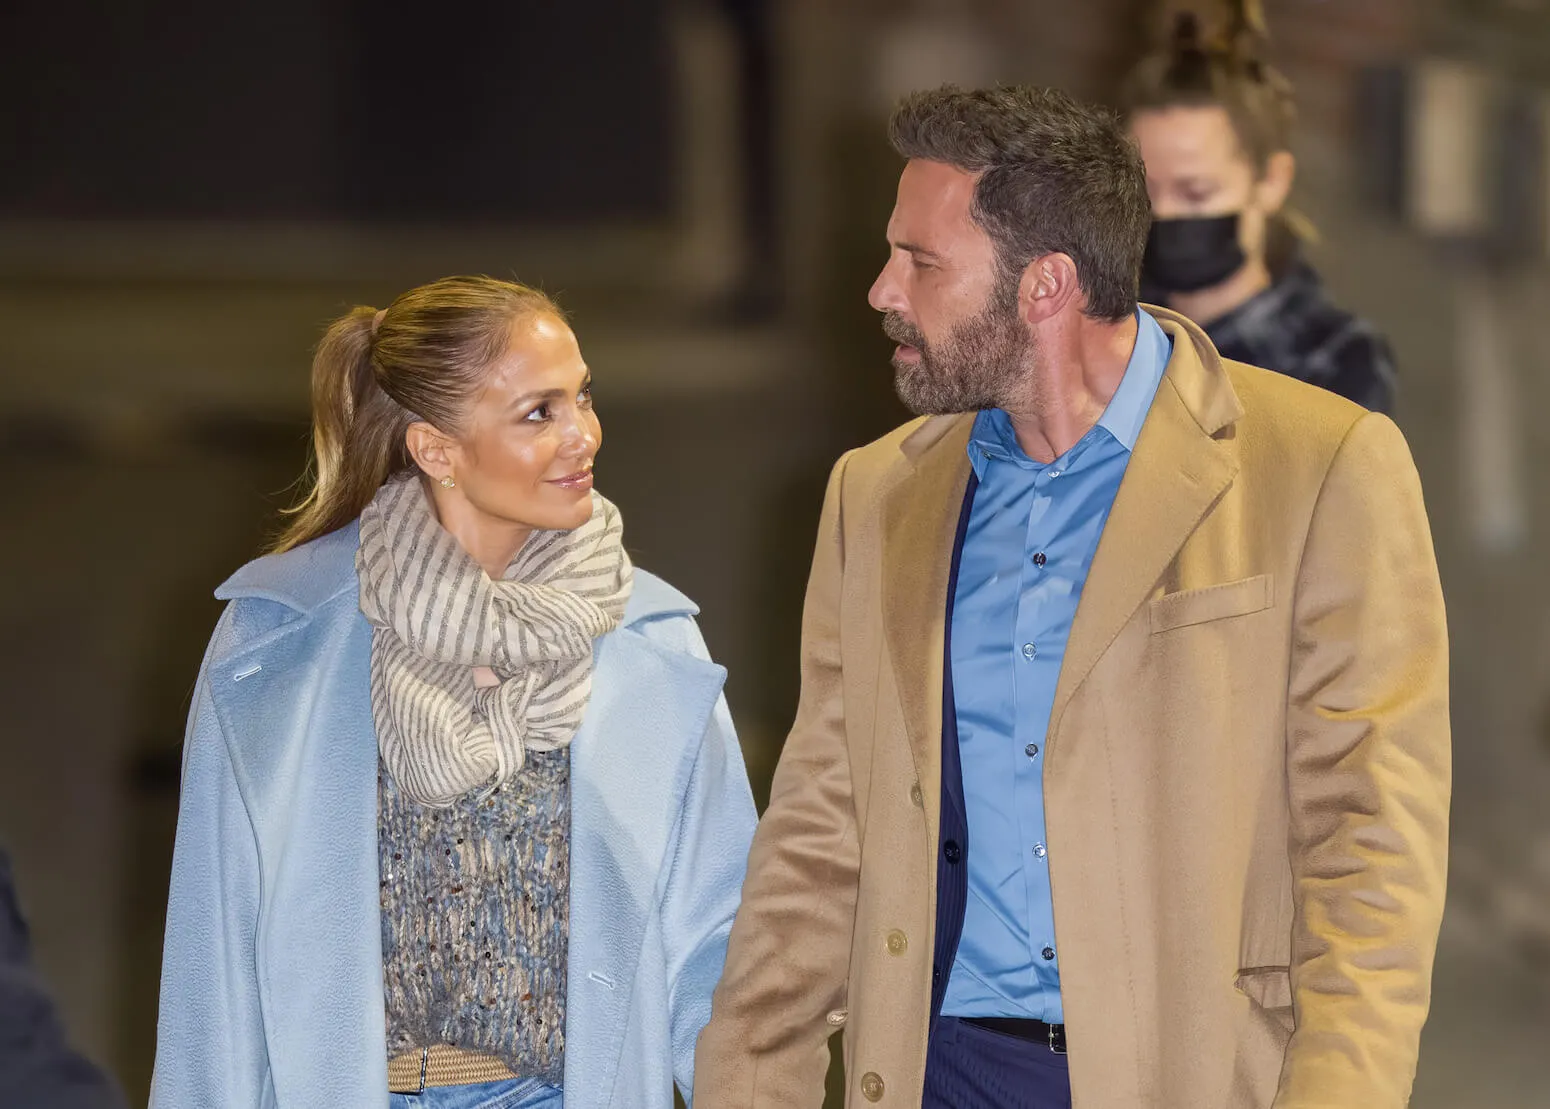 Jennifer Lopez and Ben Affleck walking and looking at each other in 2021. They are dressed for cold weather.